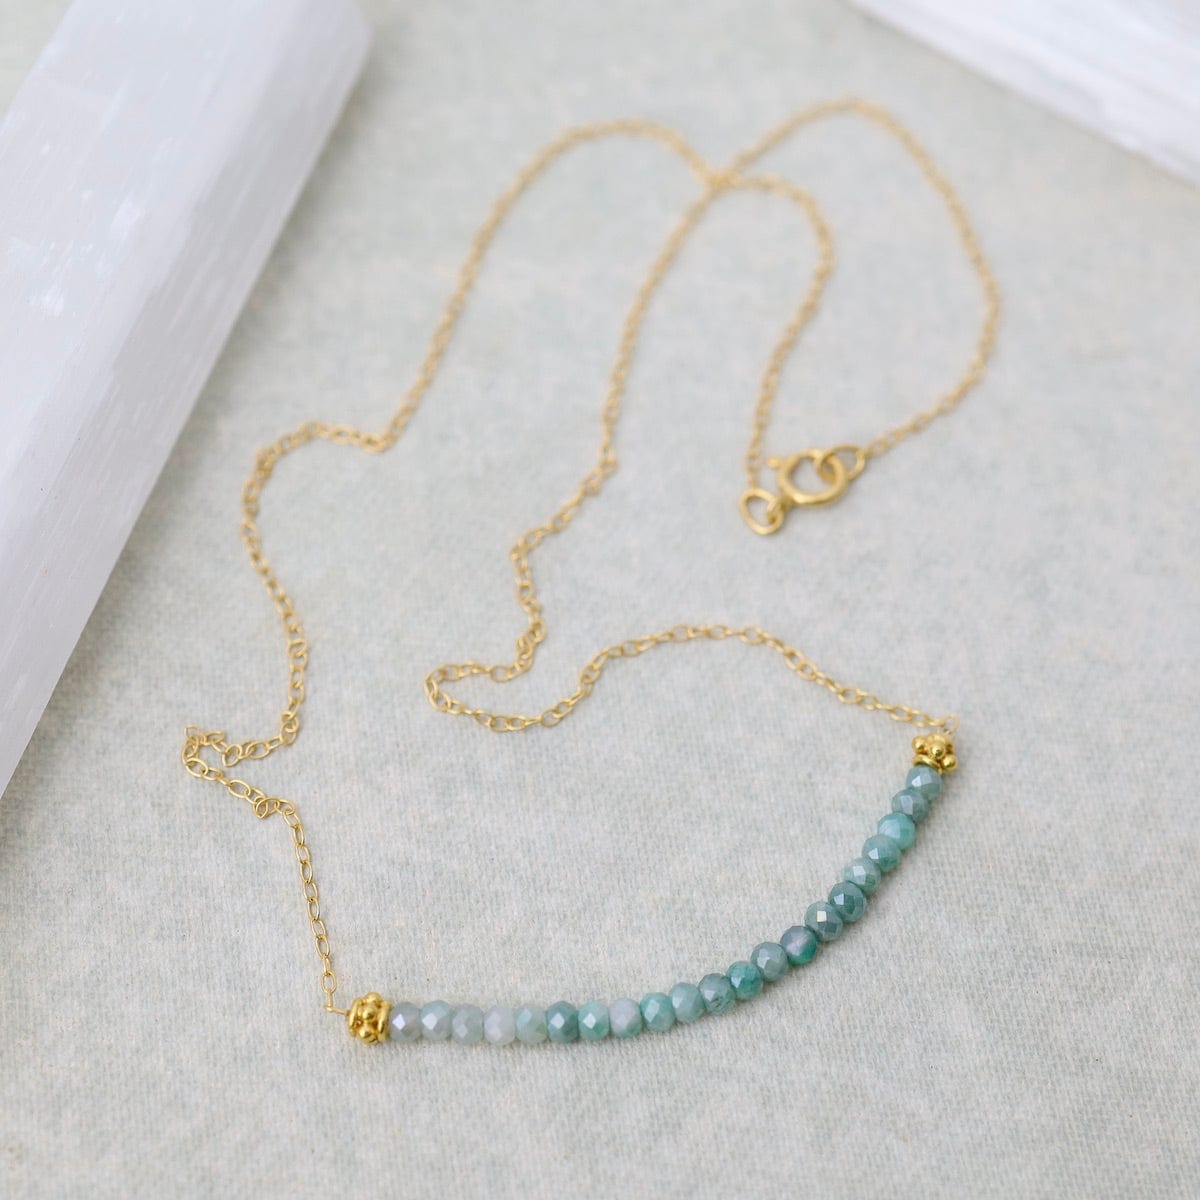 NKL-GF Gold Filled Chain with Gemstone Arc - Green Silver